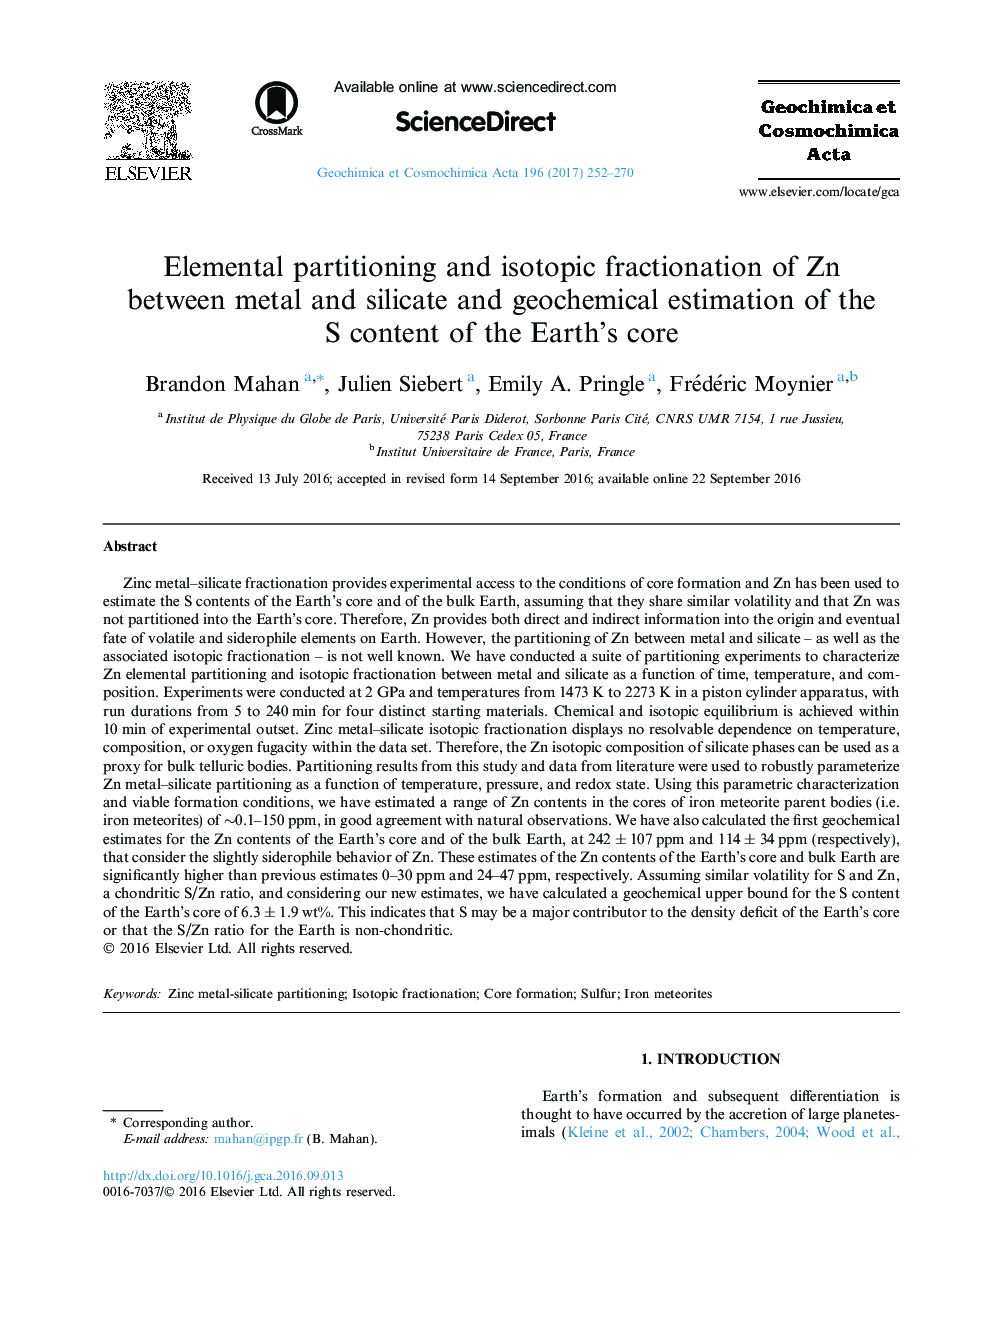 Elemental partitioning and isotopic fractionation of Zn between metal and silicate and geochemical estimation of the S content of the Earth's core